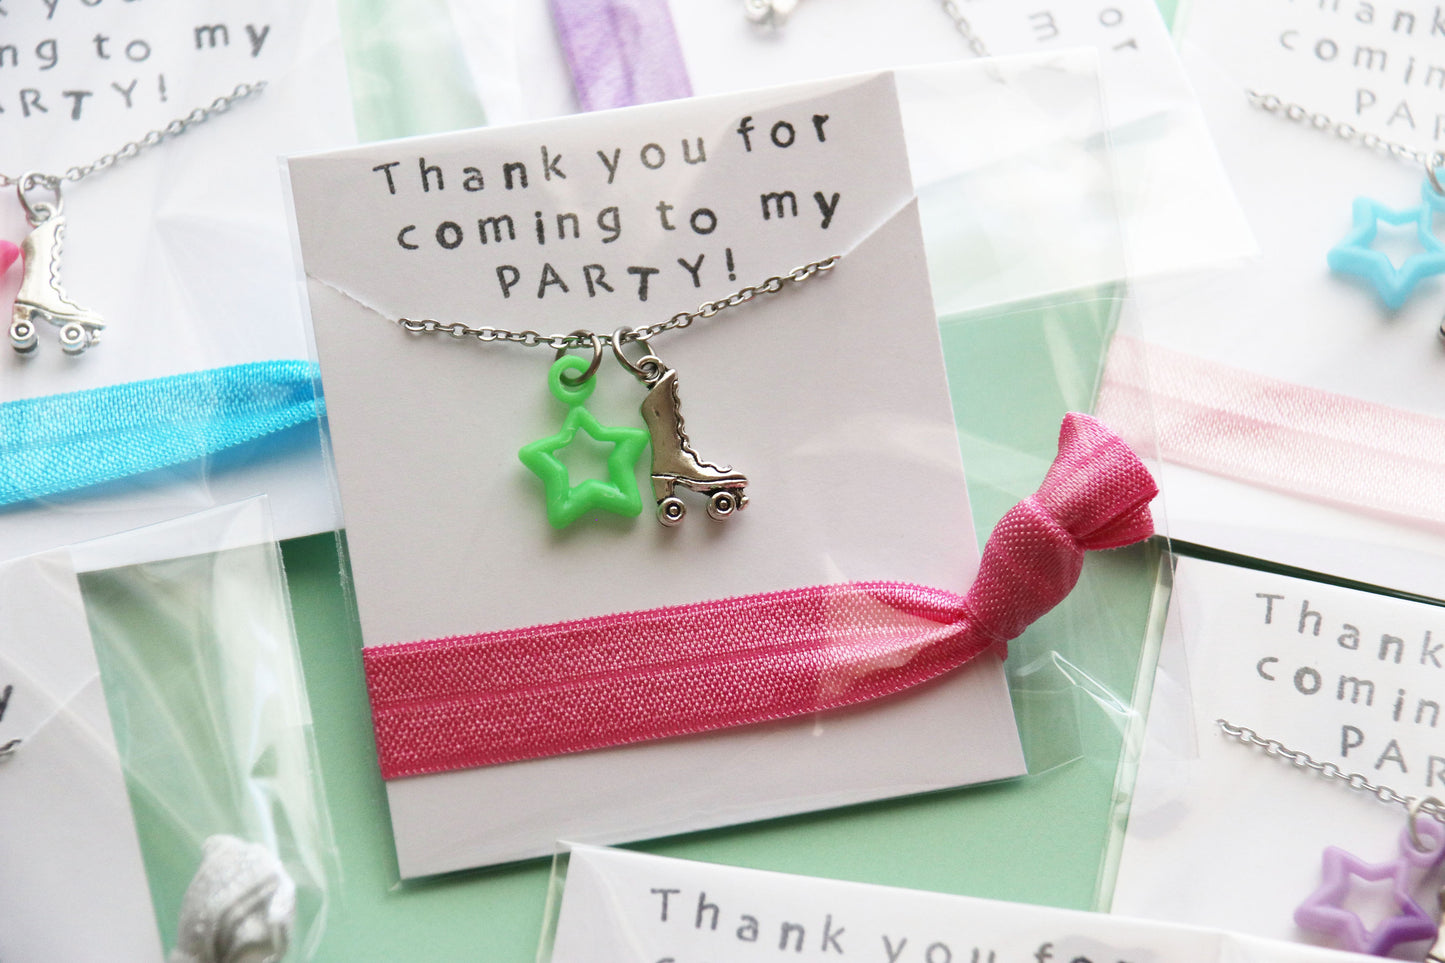 Roller Skate Star Party Favor Necklace with Hair Tie, Party Favors